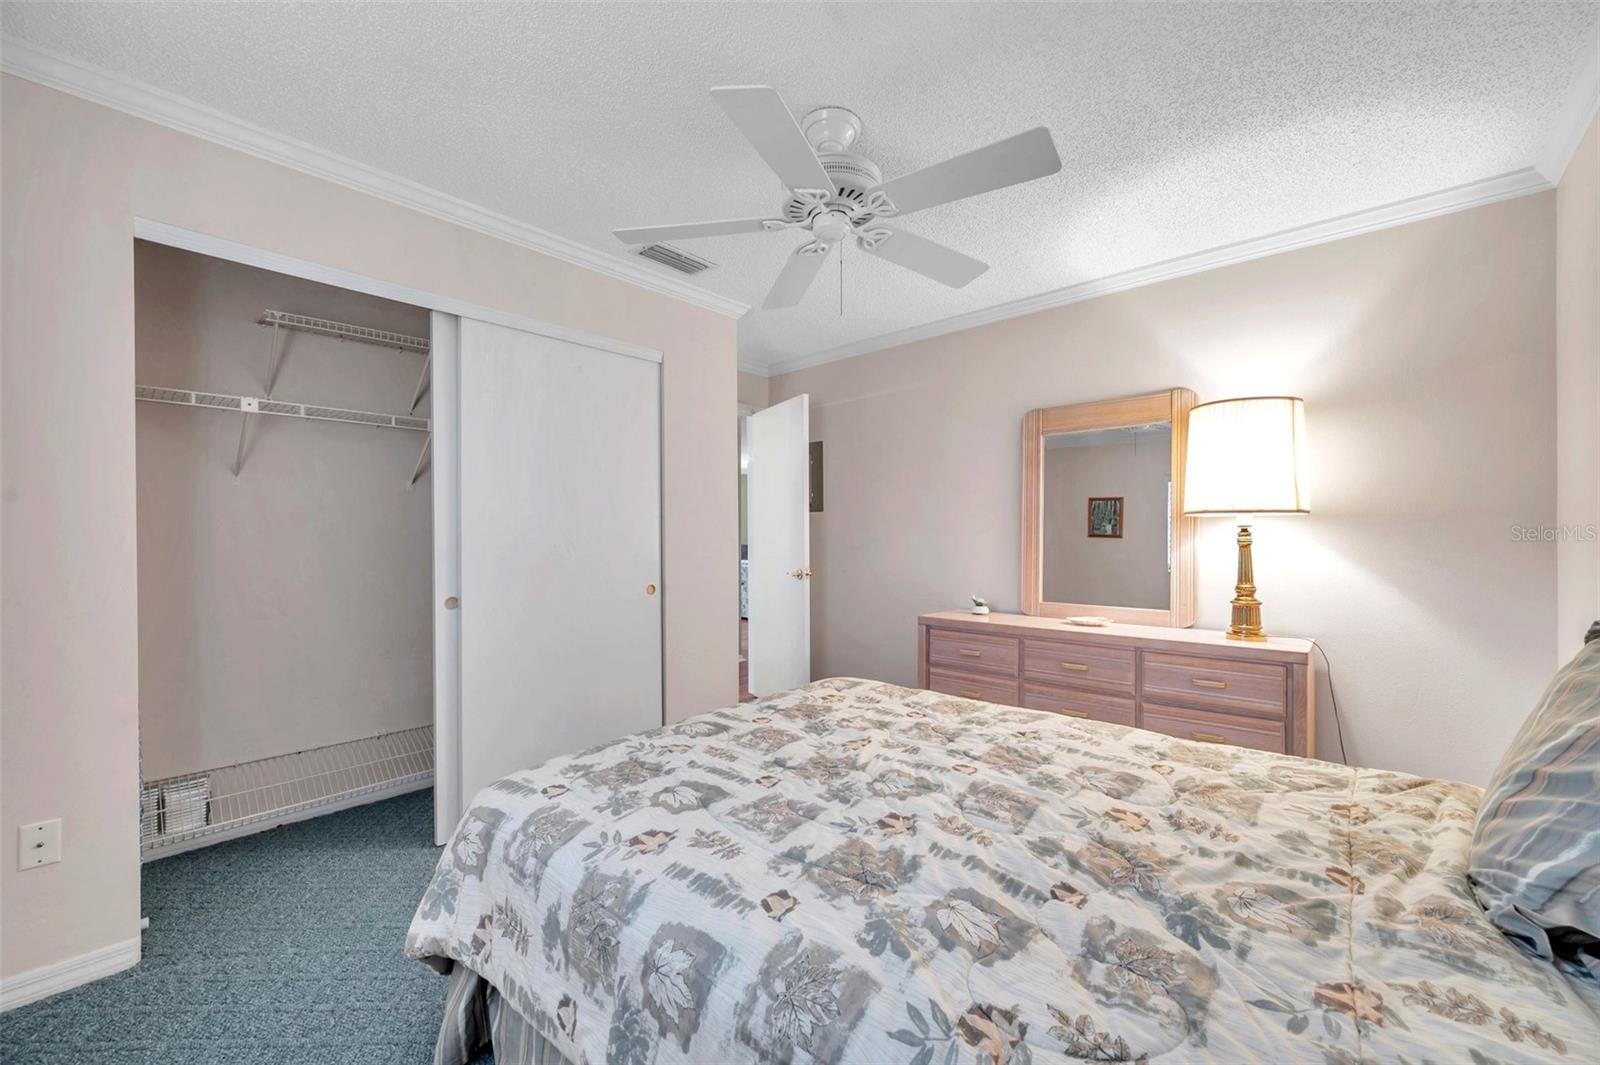 Guest bedroom has a double size closet, ceiling fan and carpet.